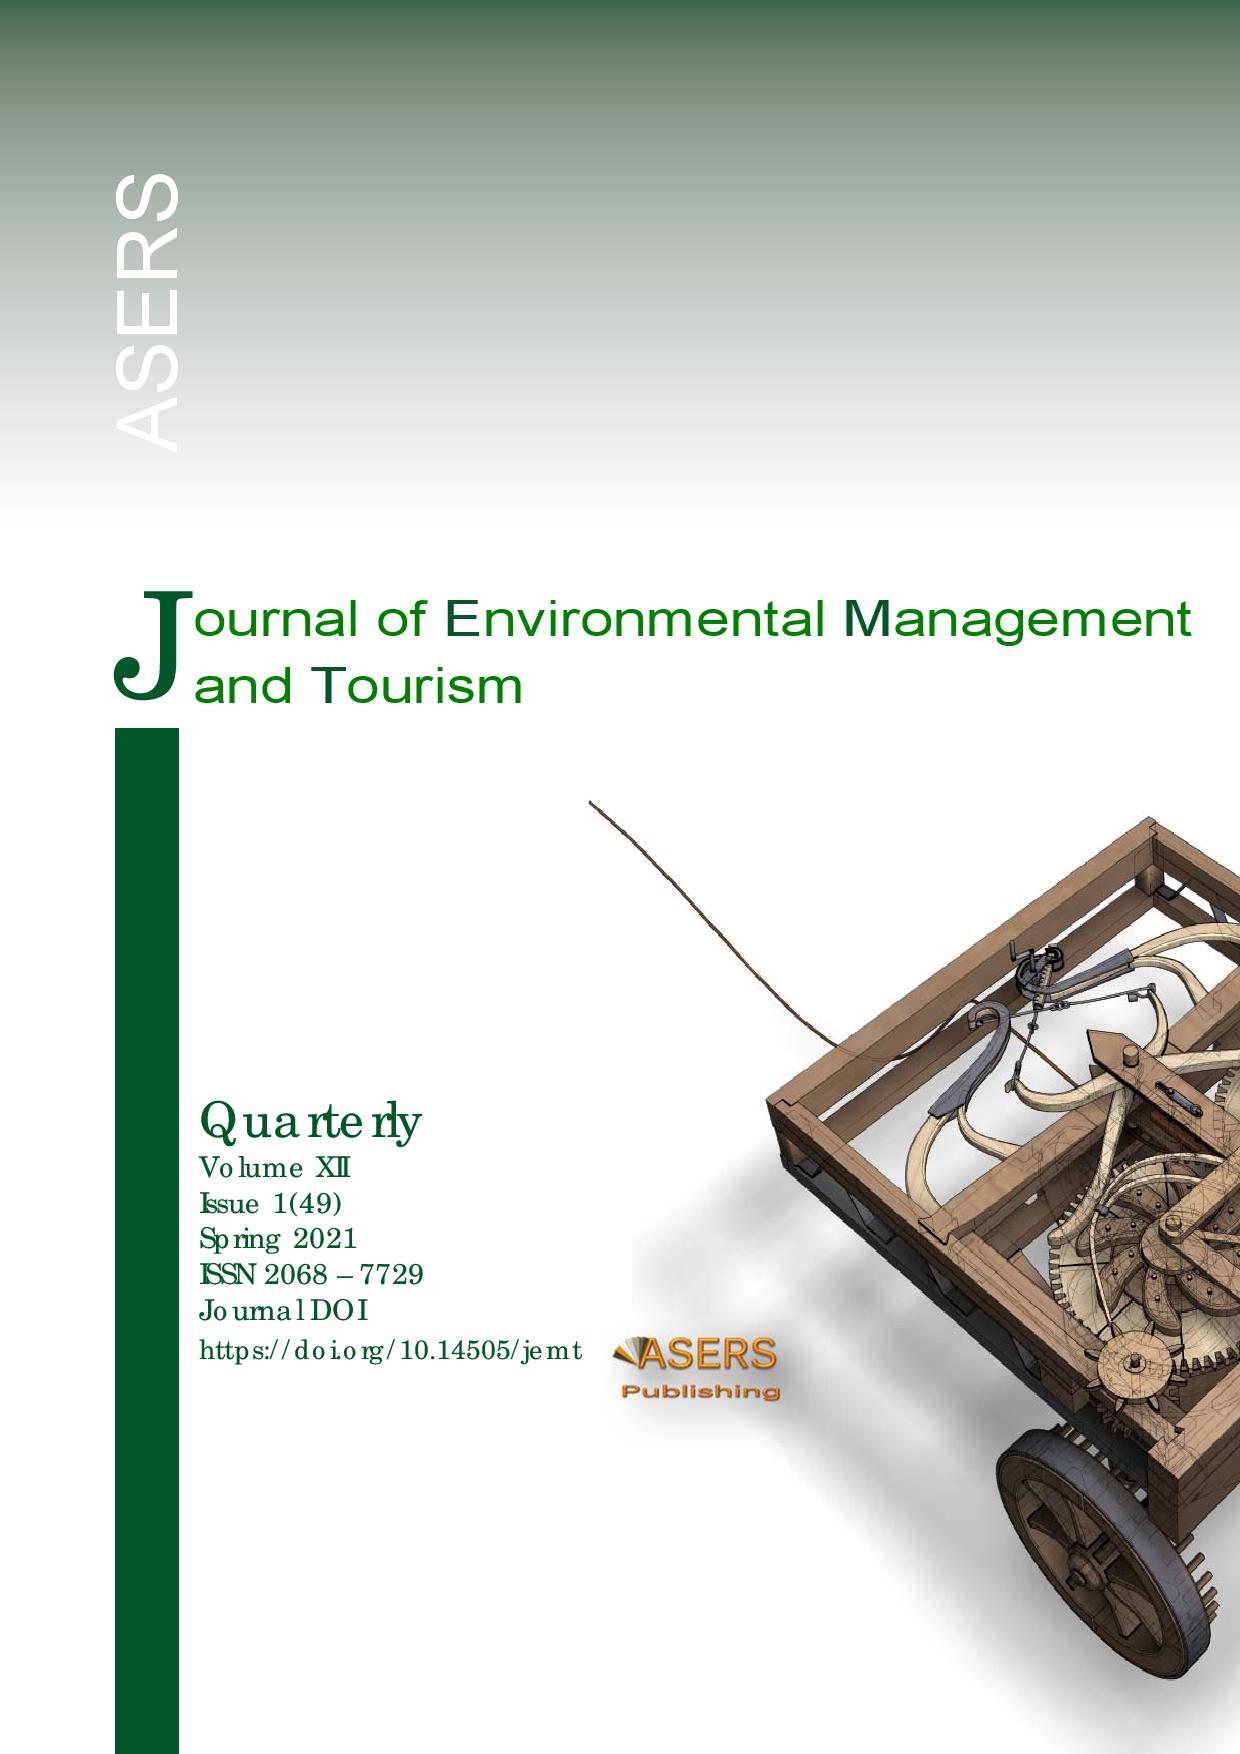 Evaluation of Touristic Risks While Visiting Ukraine and the Risk Perception by Travelers